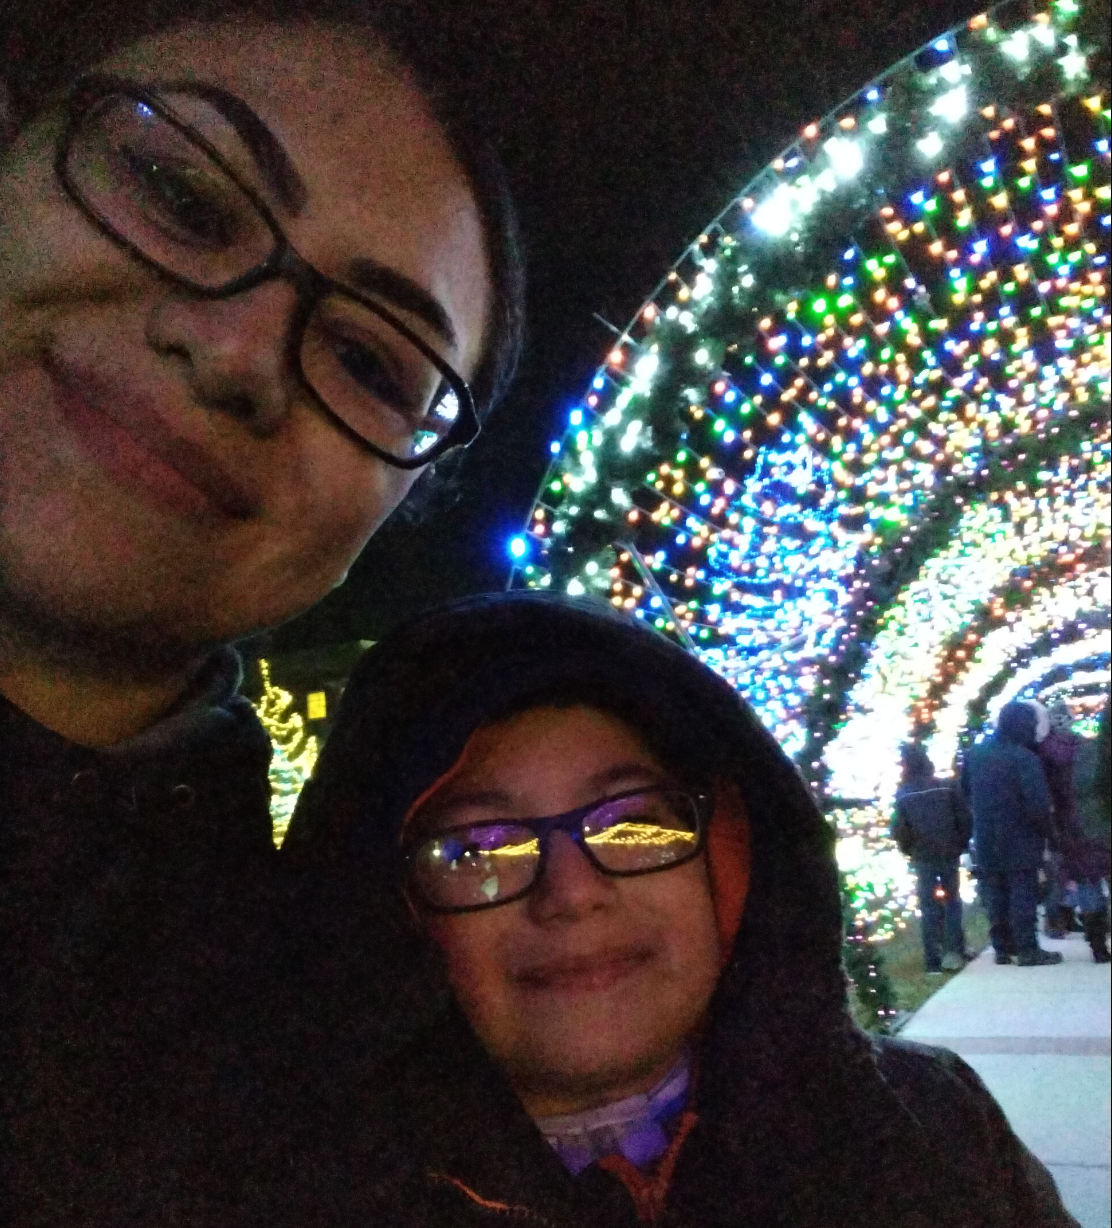 Child who needed surgery with mother at holiday light display